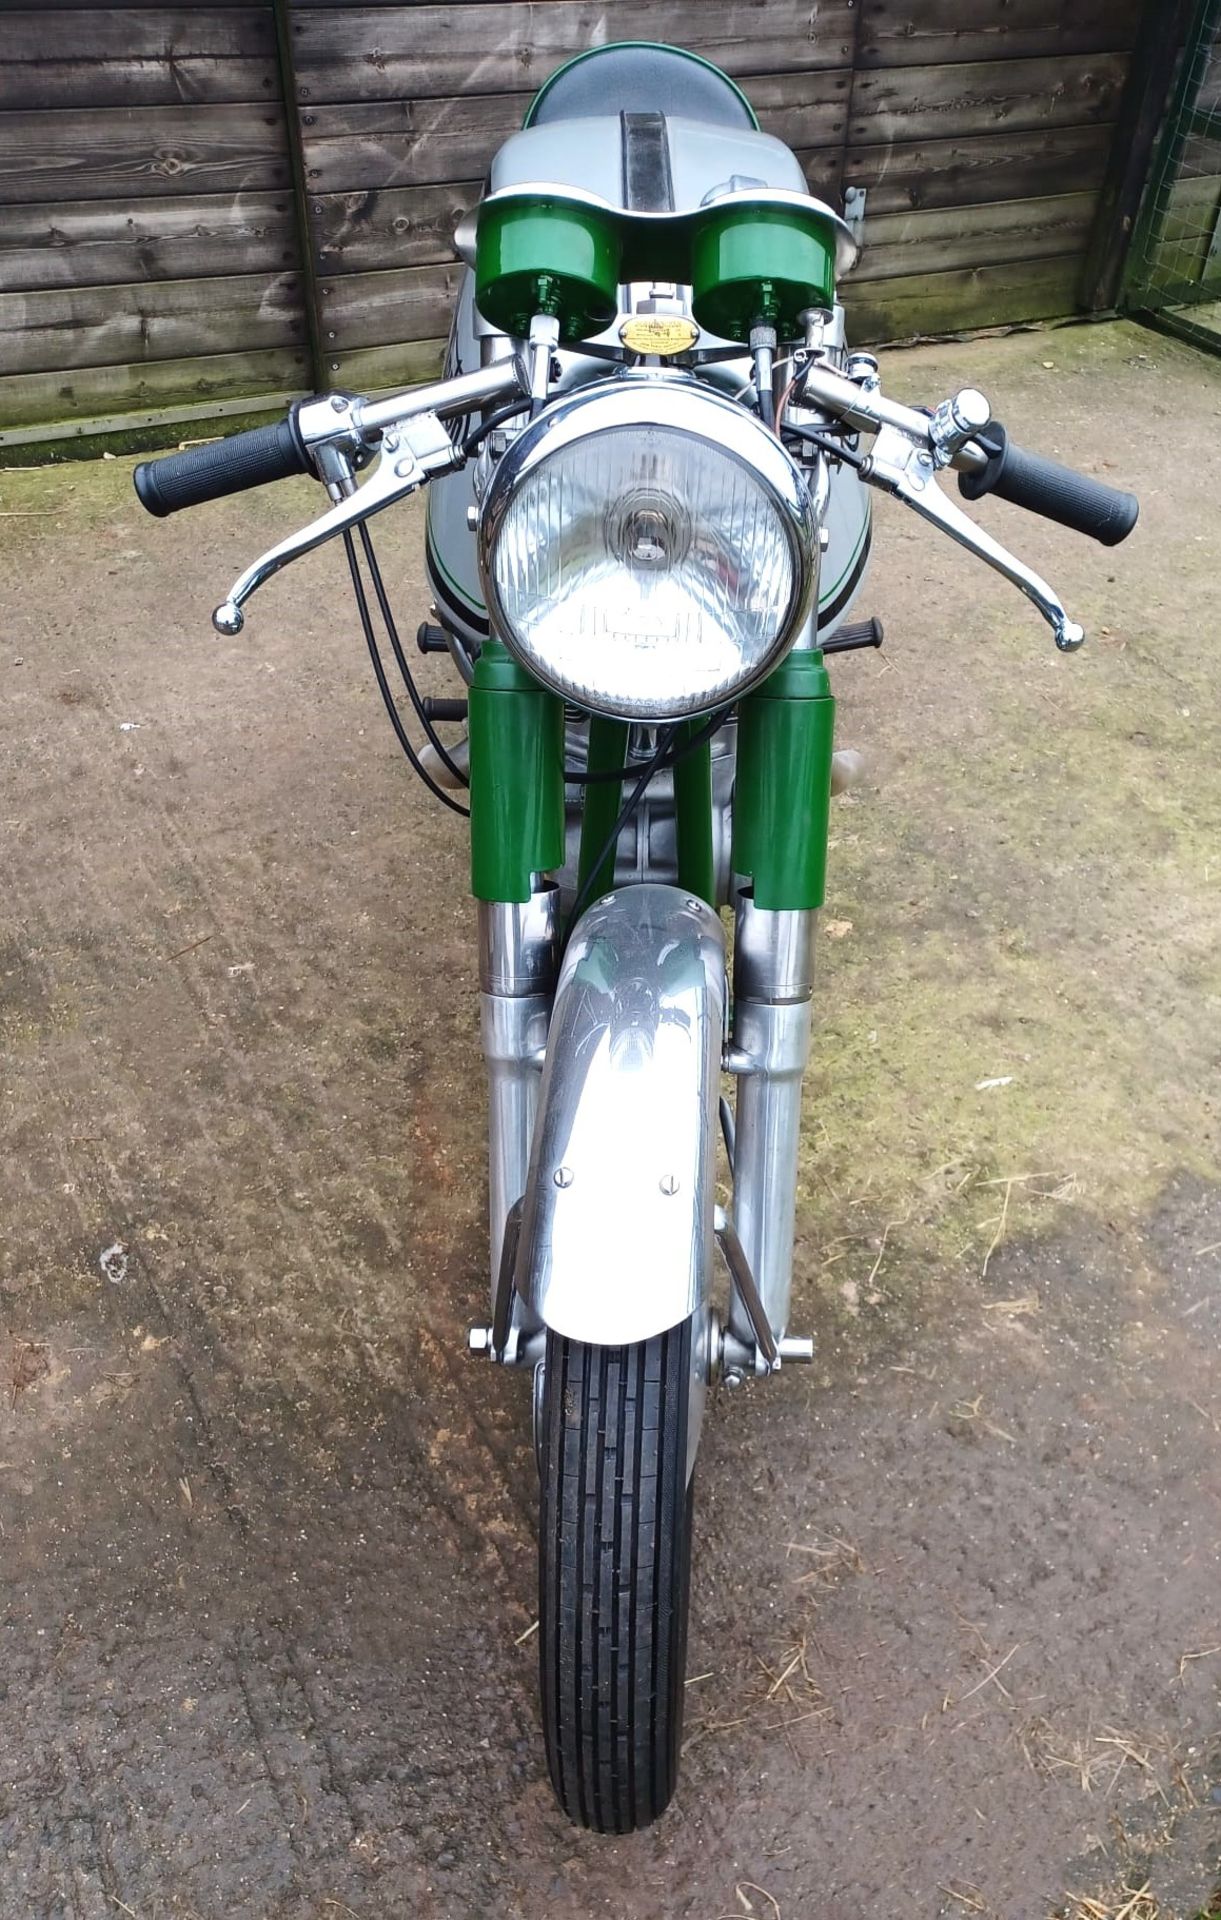 1958 TRITON 650cc Registration Number: 482 XVW Frame Number: TBA Recorded Mileage: 14 miles - - Image 4 of 16